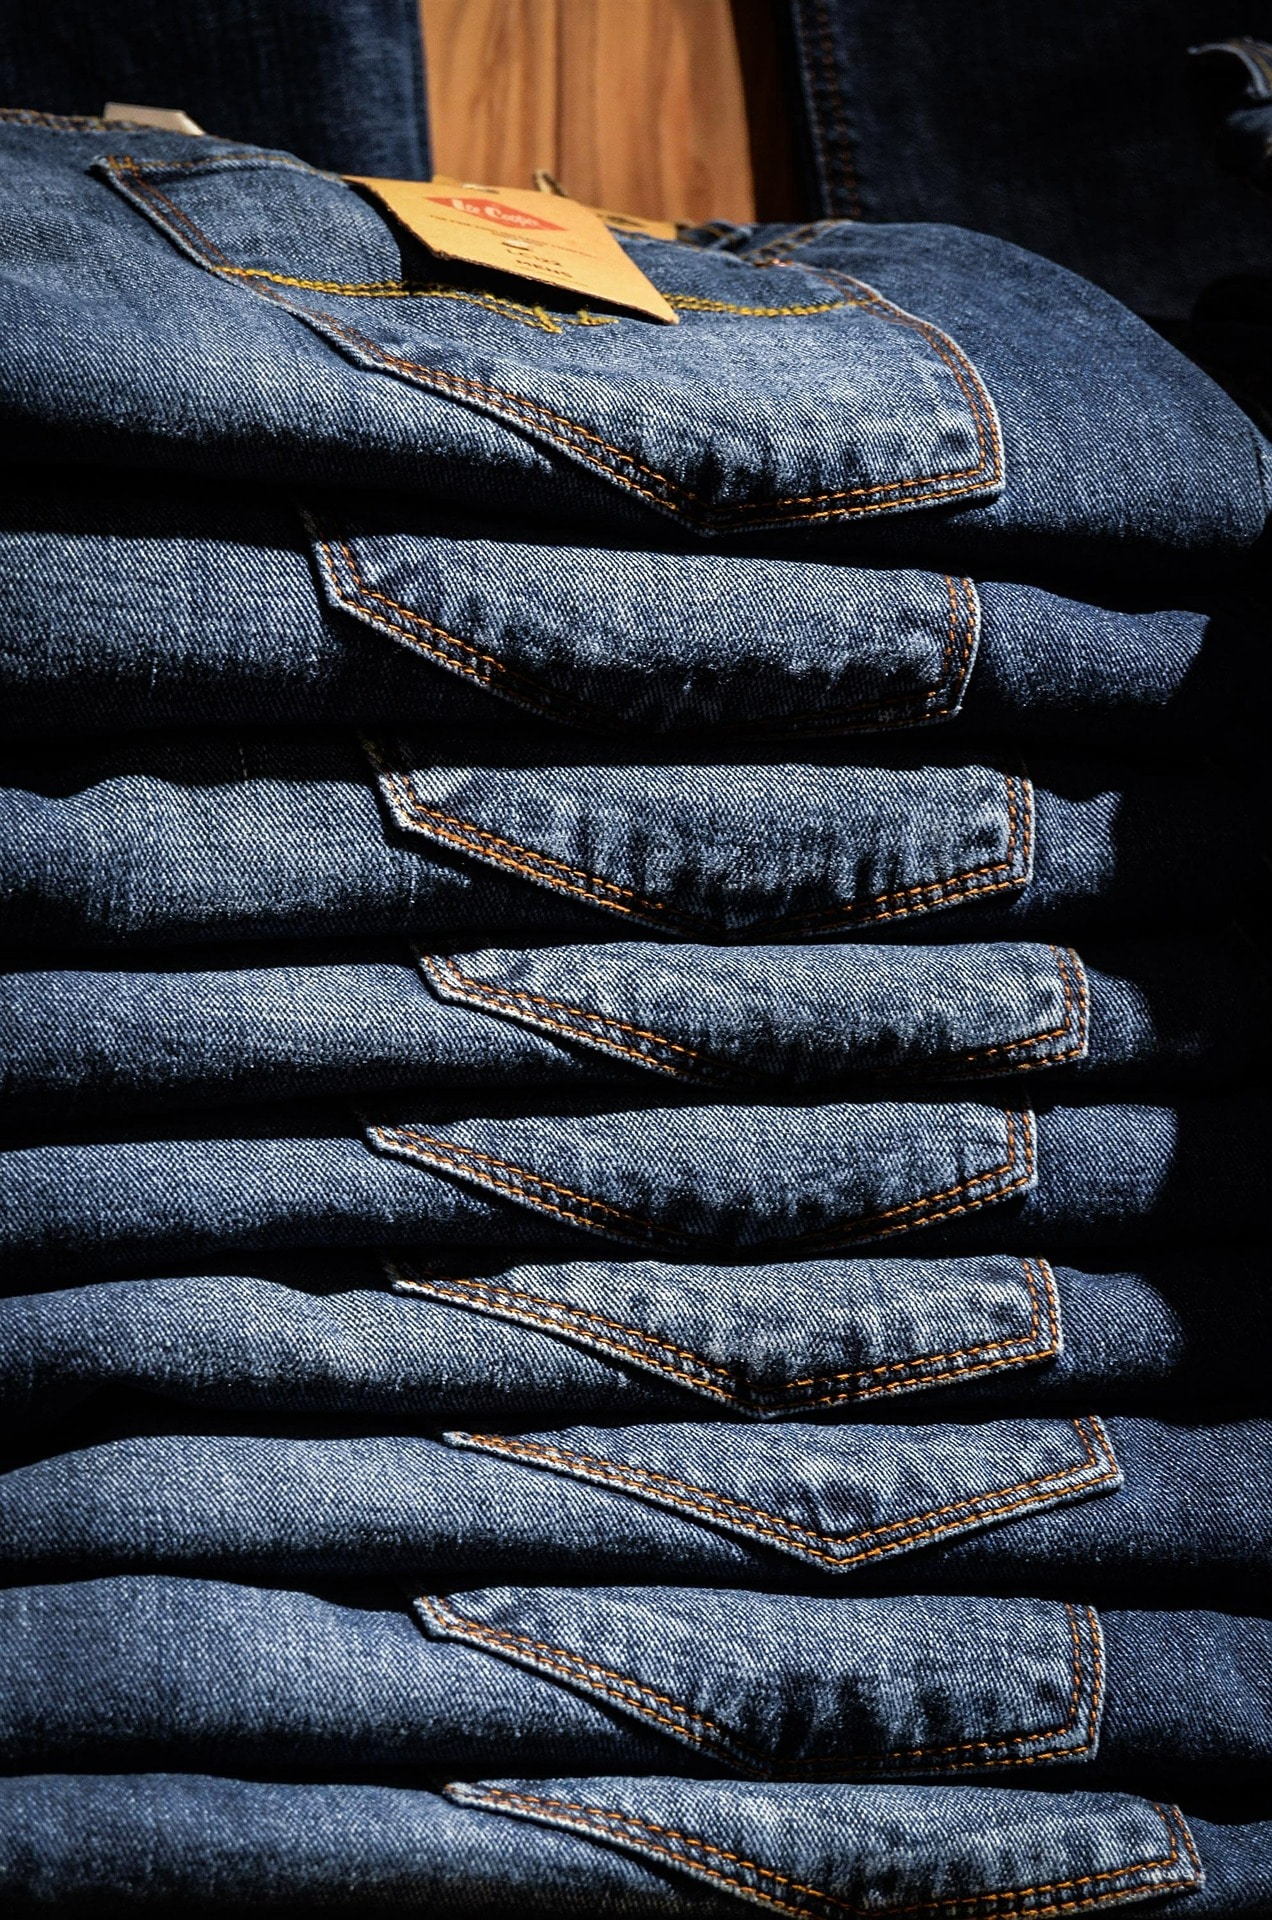 how to pinroll jeans, pinroll jeans, how to roll up jeans, pin roll, rolled up jeans mens, pinroll, rolled up jeans, pinroll pants, pinroll cuff, how to pinroll pants, how to roll jeans, how to roll your jeans, how to roll jeans, how to pinroll, pinroll pants, how to pin roll jeans, how to tight roll jeans, pinroll cuff, how to cuff pants tight, tight rolled jeans, how to cuff jeans tight, best jeans to pinroll, pin fold jeans, tight rolled up jeans, how to pin roll skinny jeans